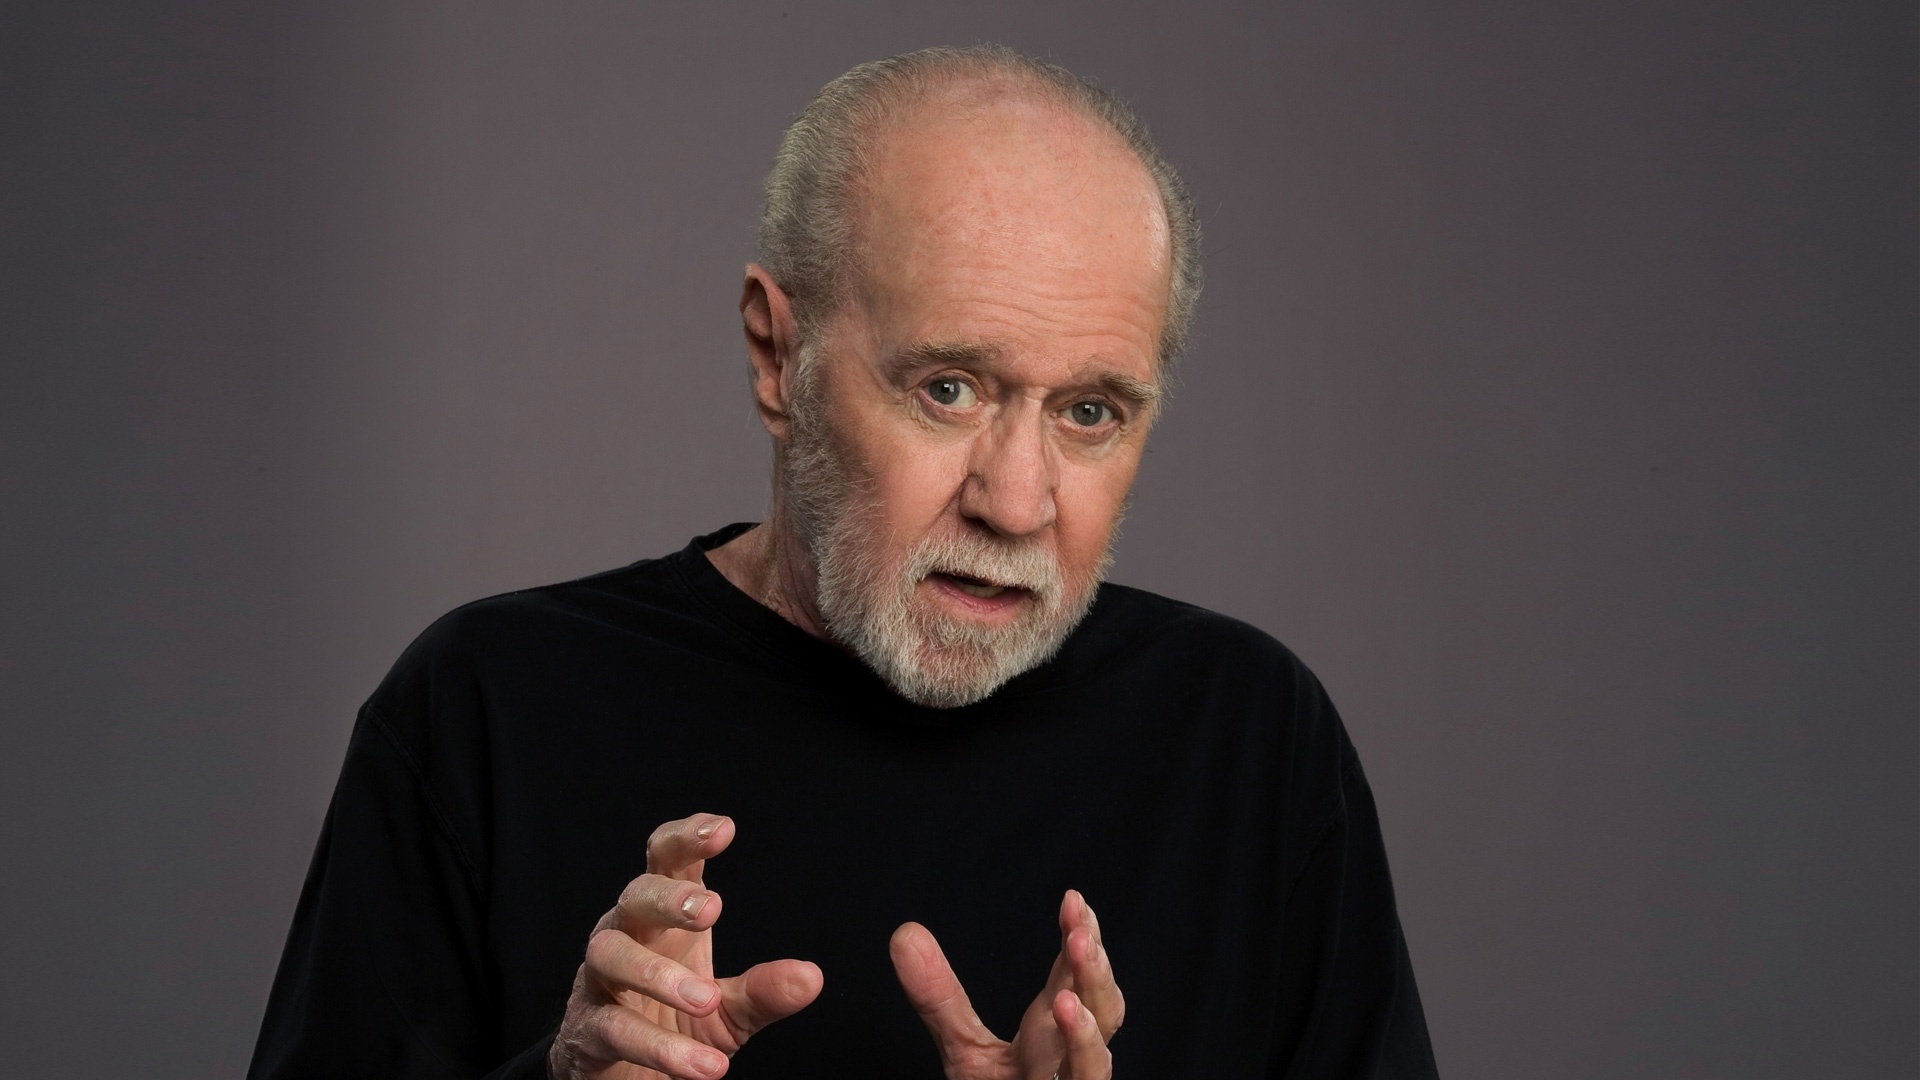 George Carlin: The 1997 American Comedy Award for Funniest Male Performer in a TV Special. 1920x1080 Full HD Wallpaper.